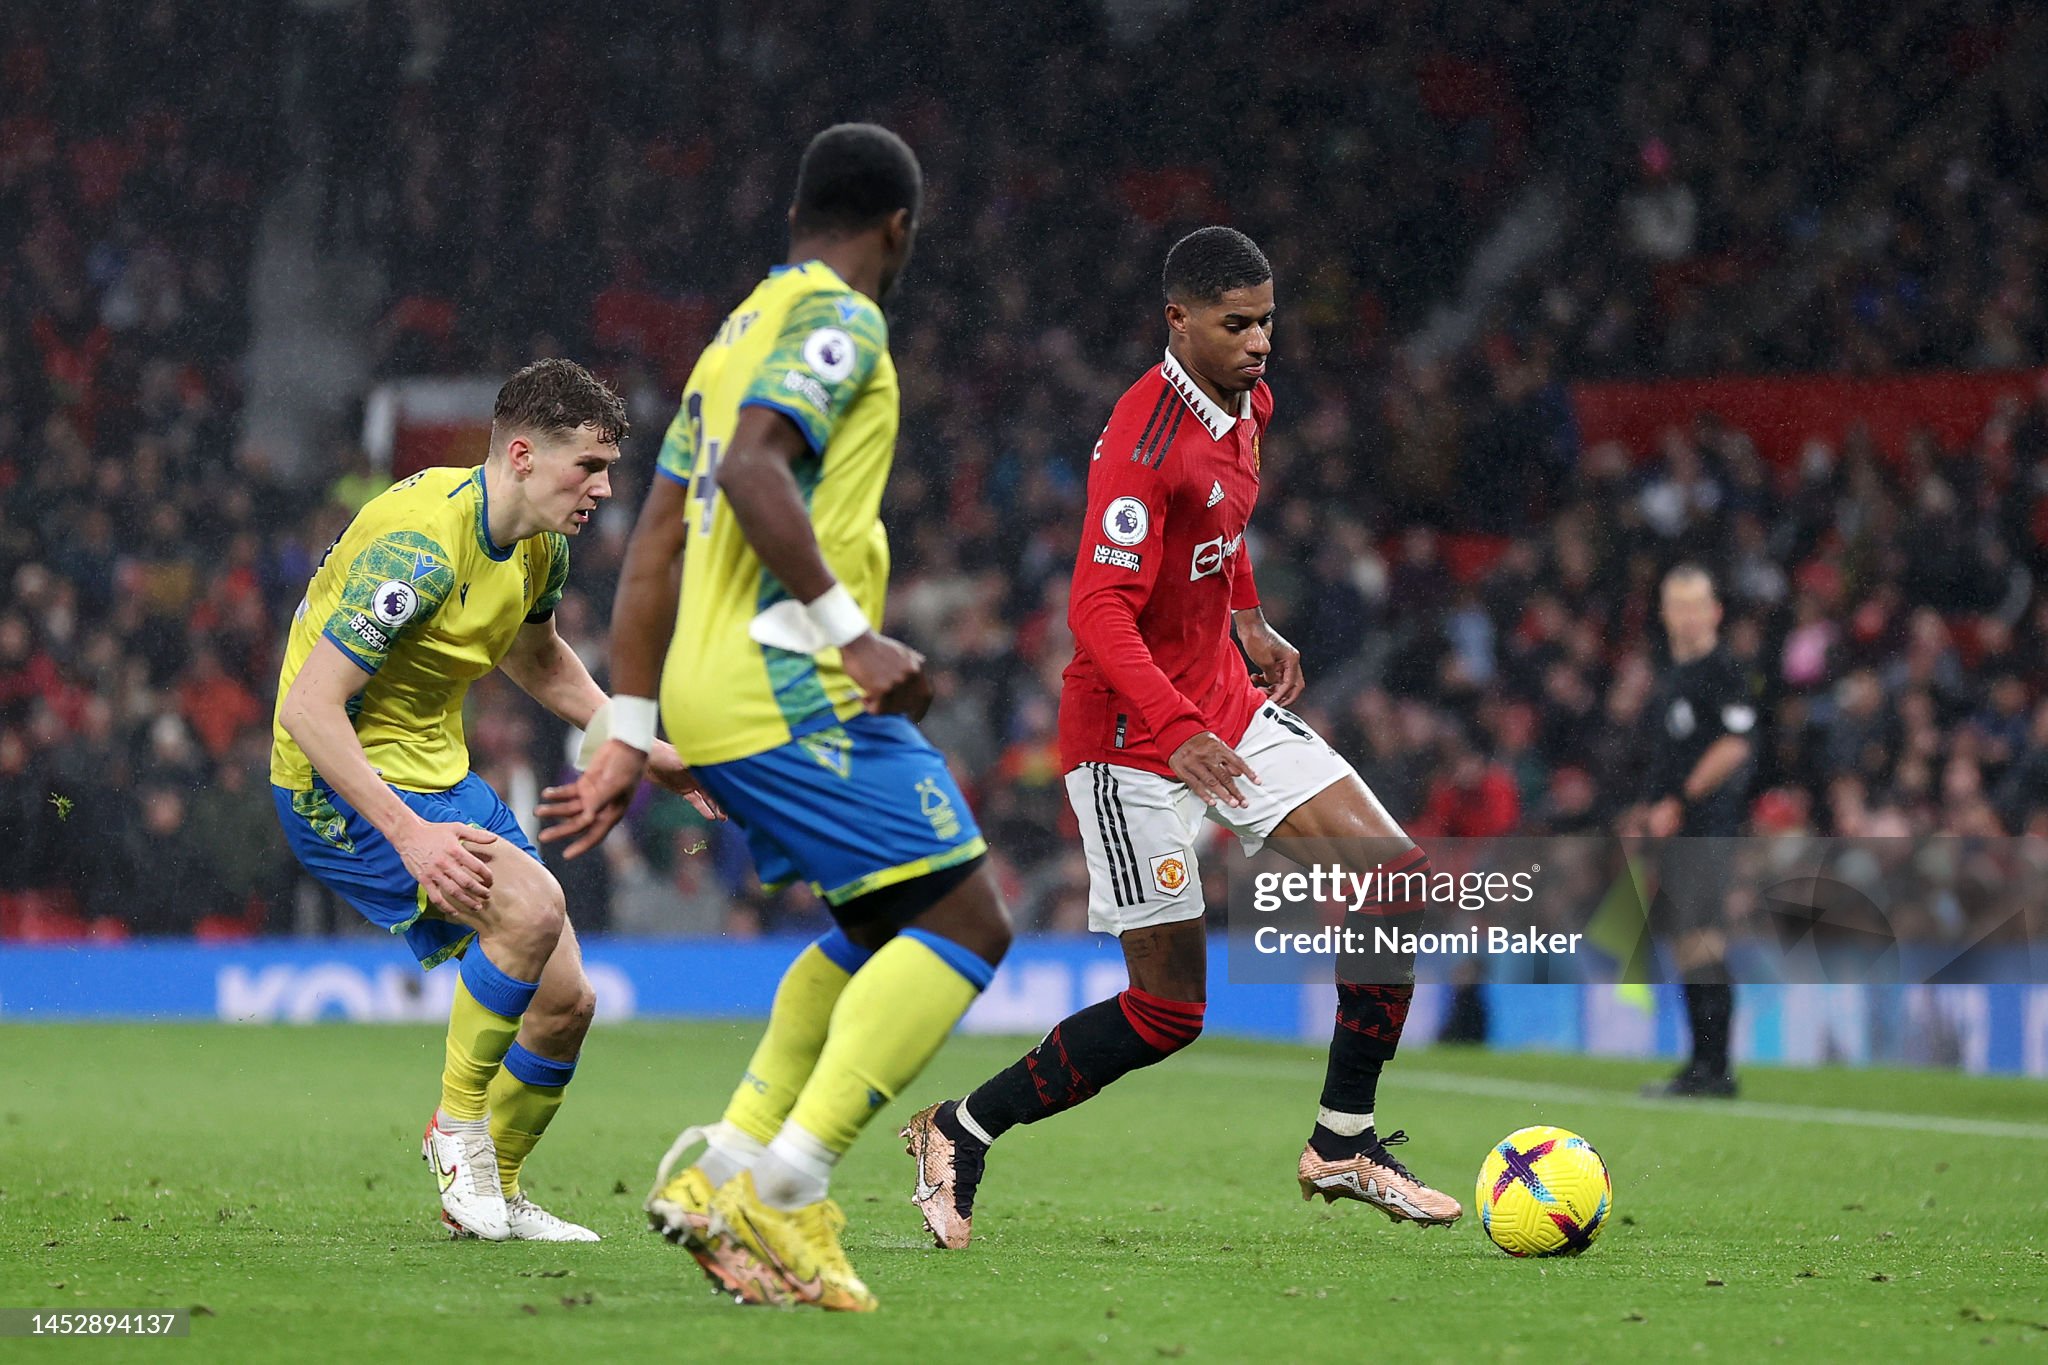 Nottingham Forest vs Manchester United preview, prediction and odds